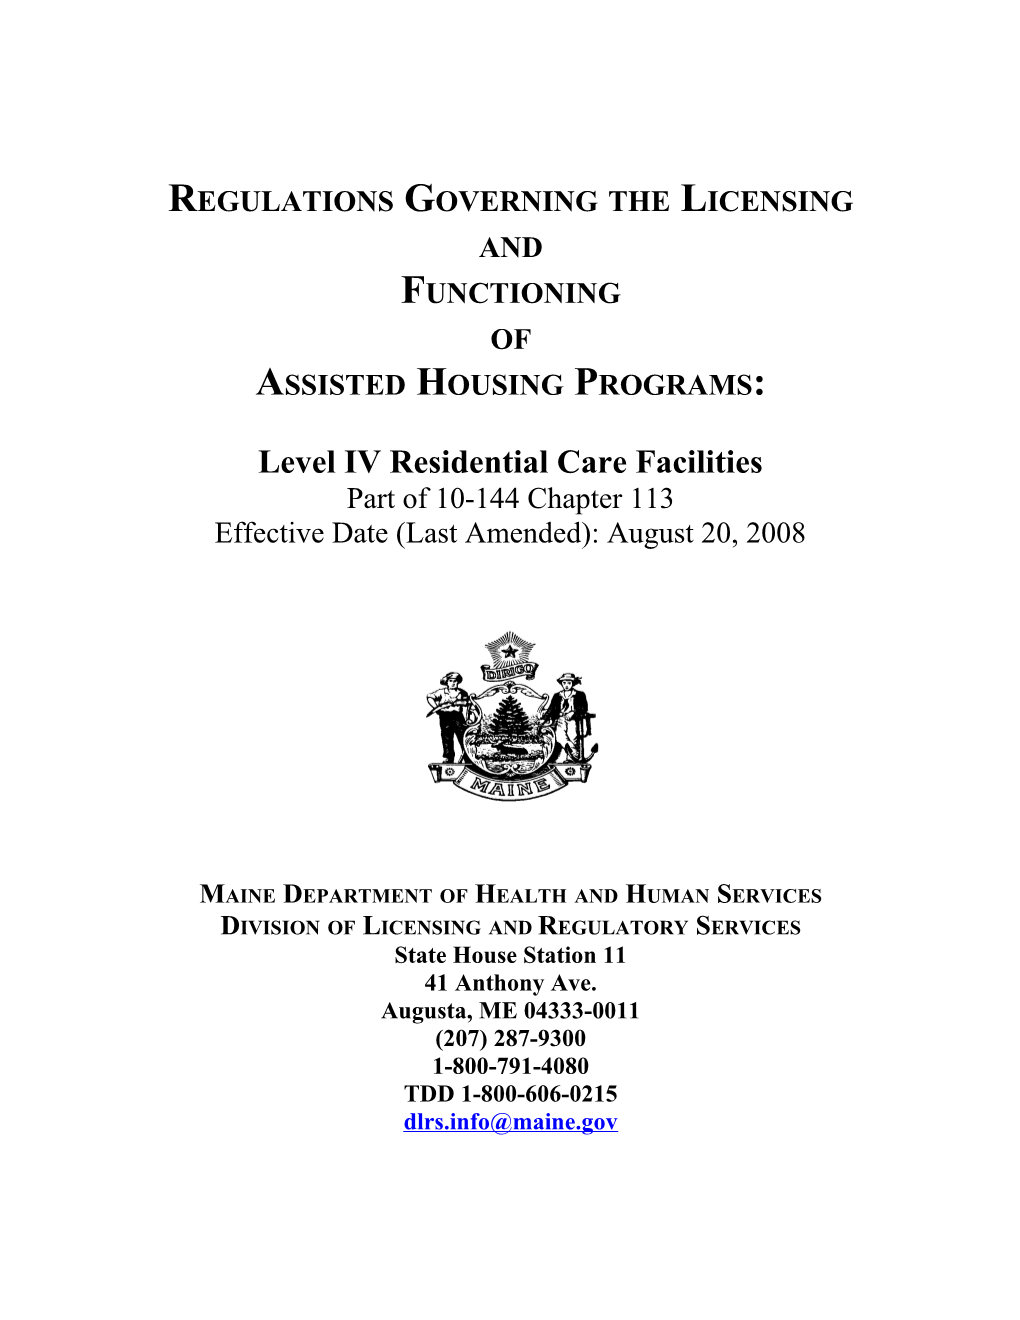 10-144 Chapter 113: Regulations Governing the Licensing and Functioning of Assisted Housing